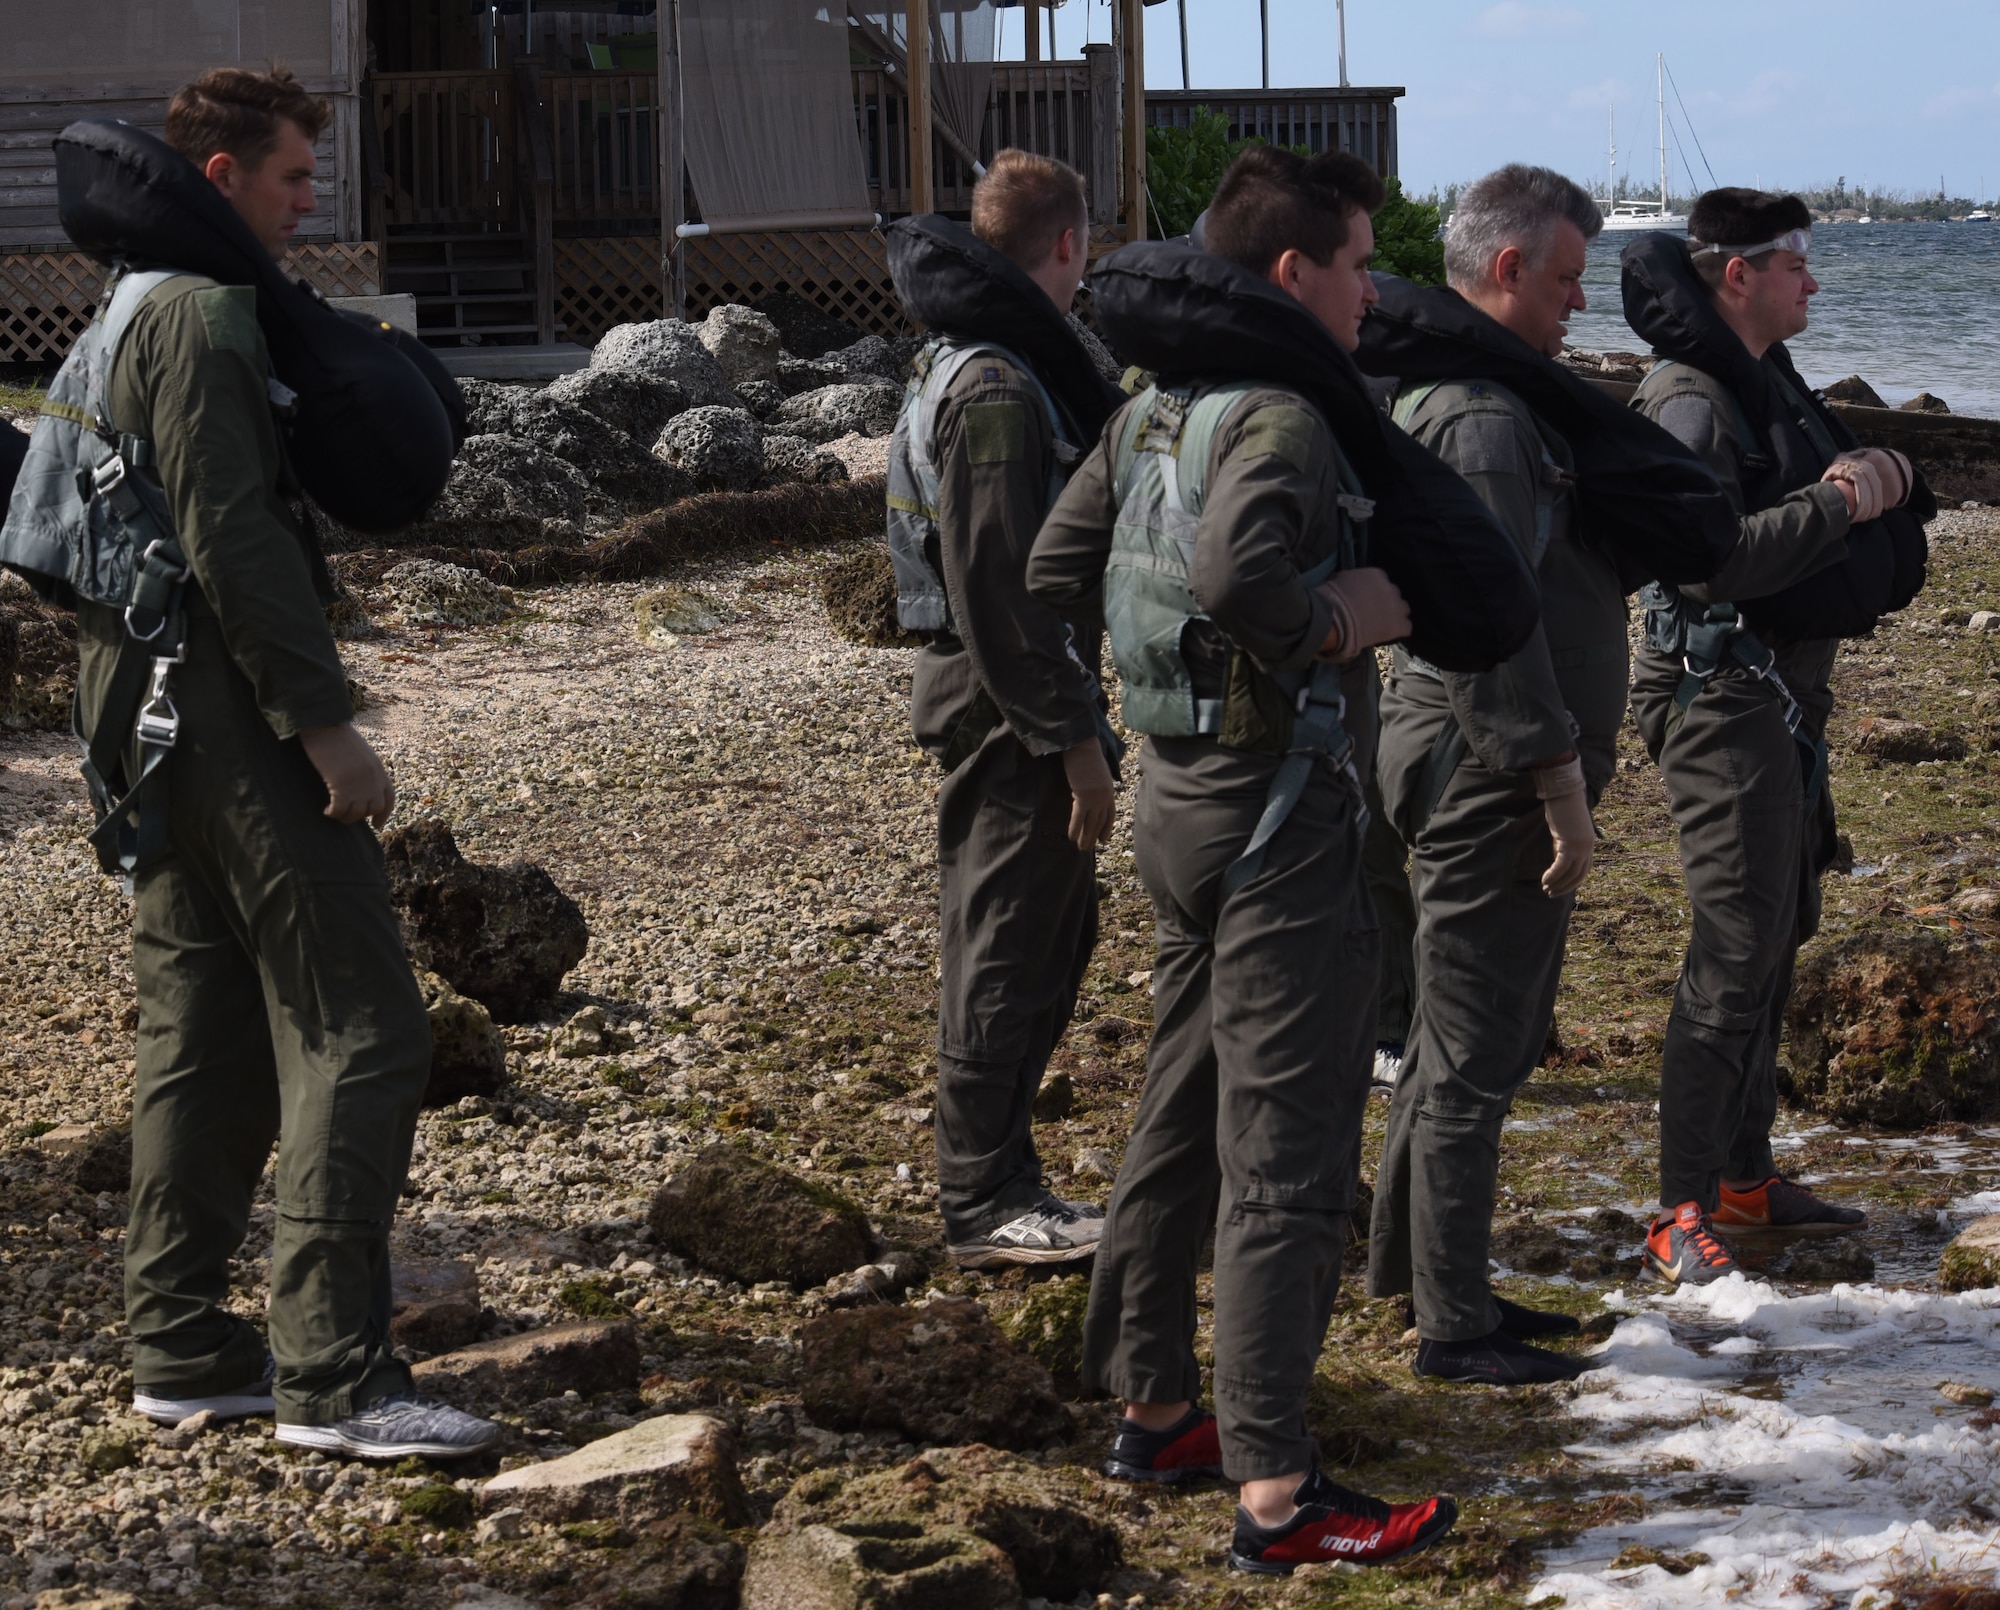 Pilots from the 355th Fighter Squadron prepare to go through water survival training, Oct. 28, 2018, at Naval Air Station Key West, Florida. The pilots, who are required to go through the course every three years, learn how to escape parachute entanglements and survive in a one-man raft in case of emergency, which helps them stay combat and deployment-ready. (U.S. Air Force photo by Tech. Sgt. Charles Taylor)